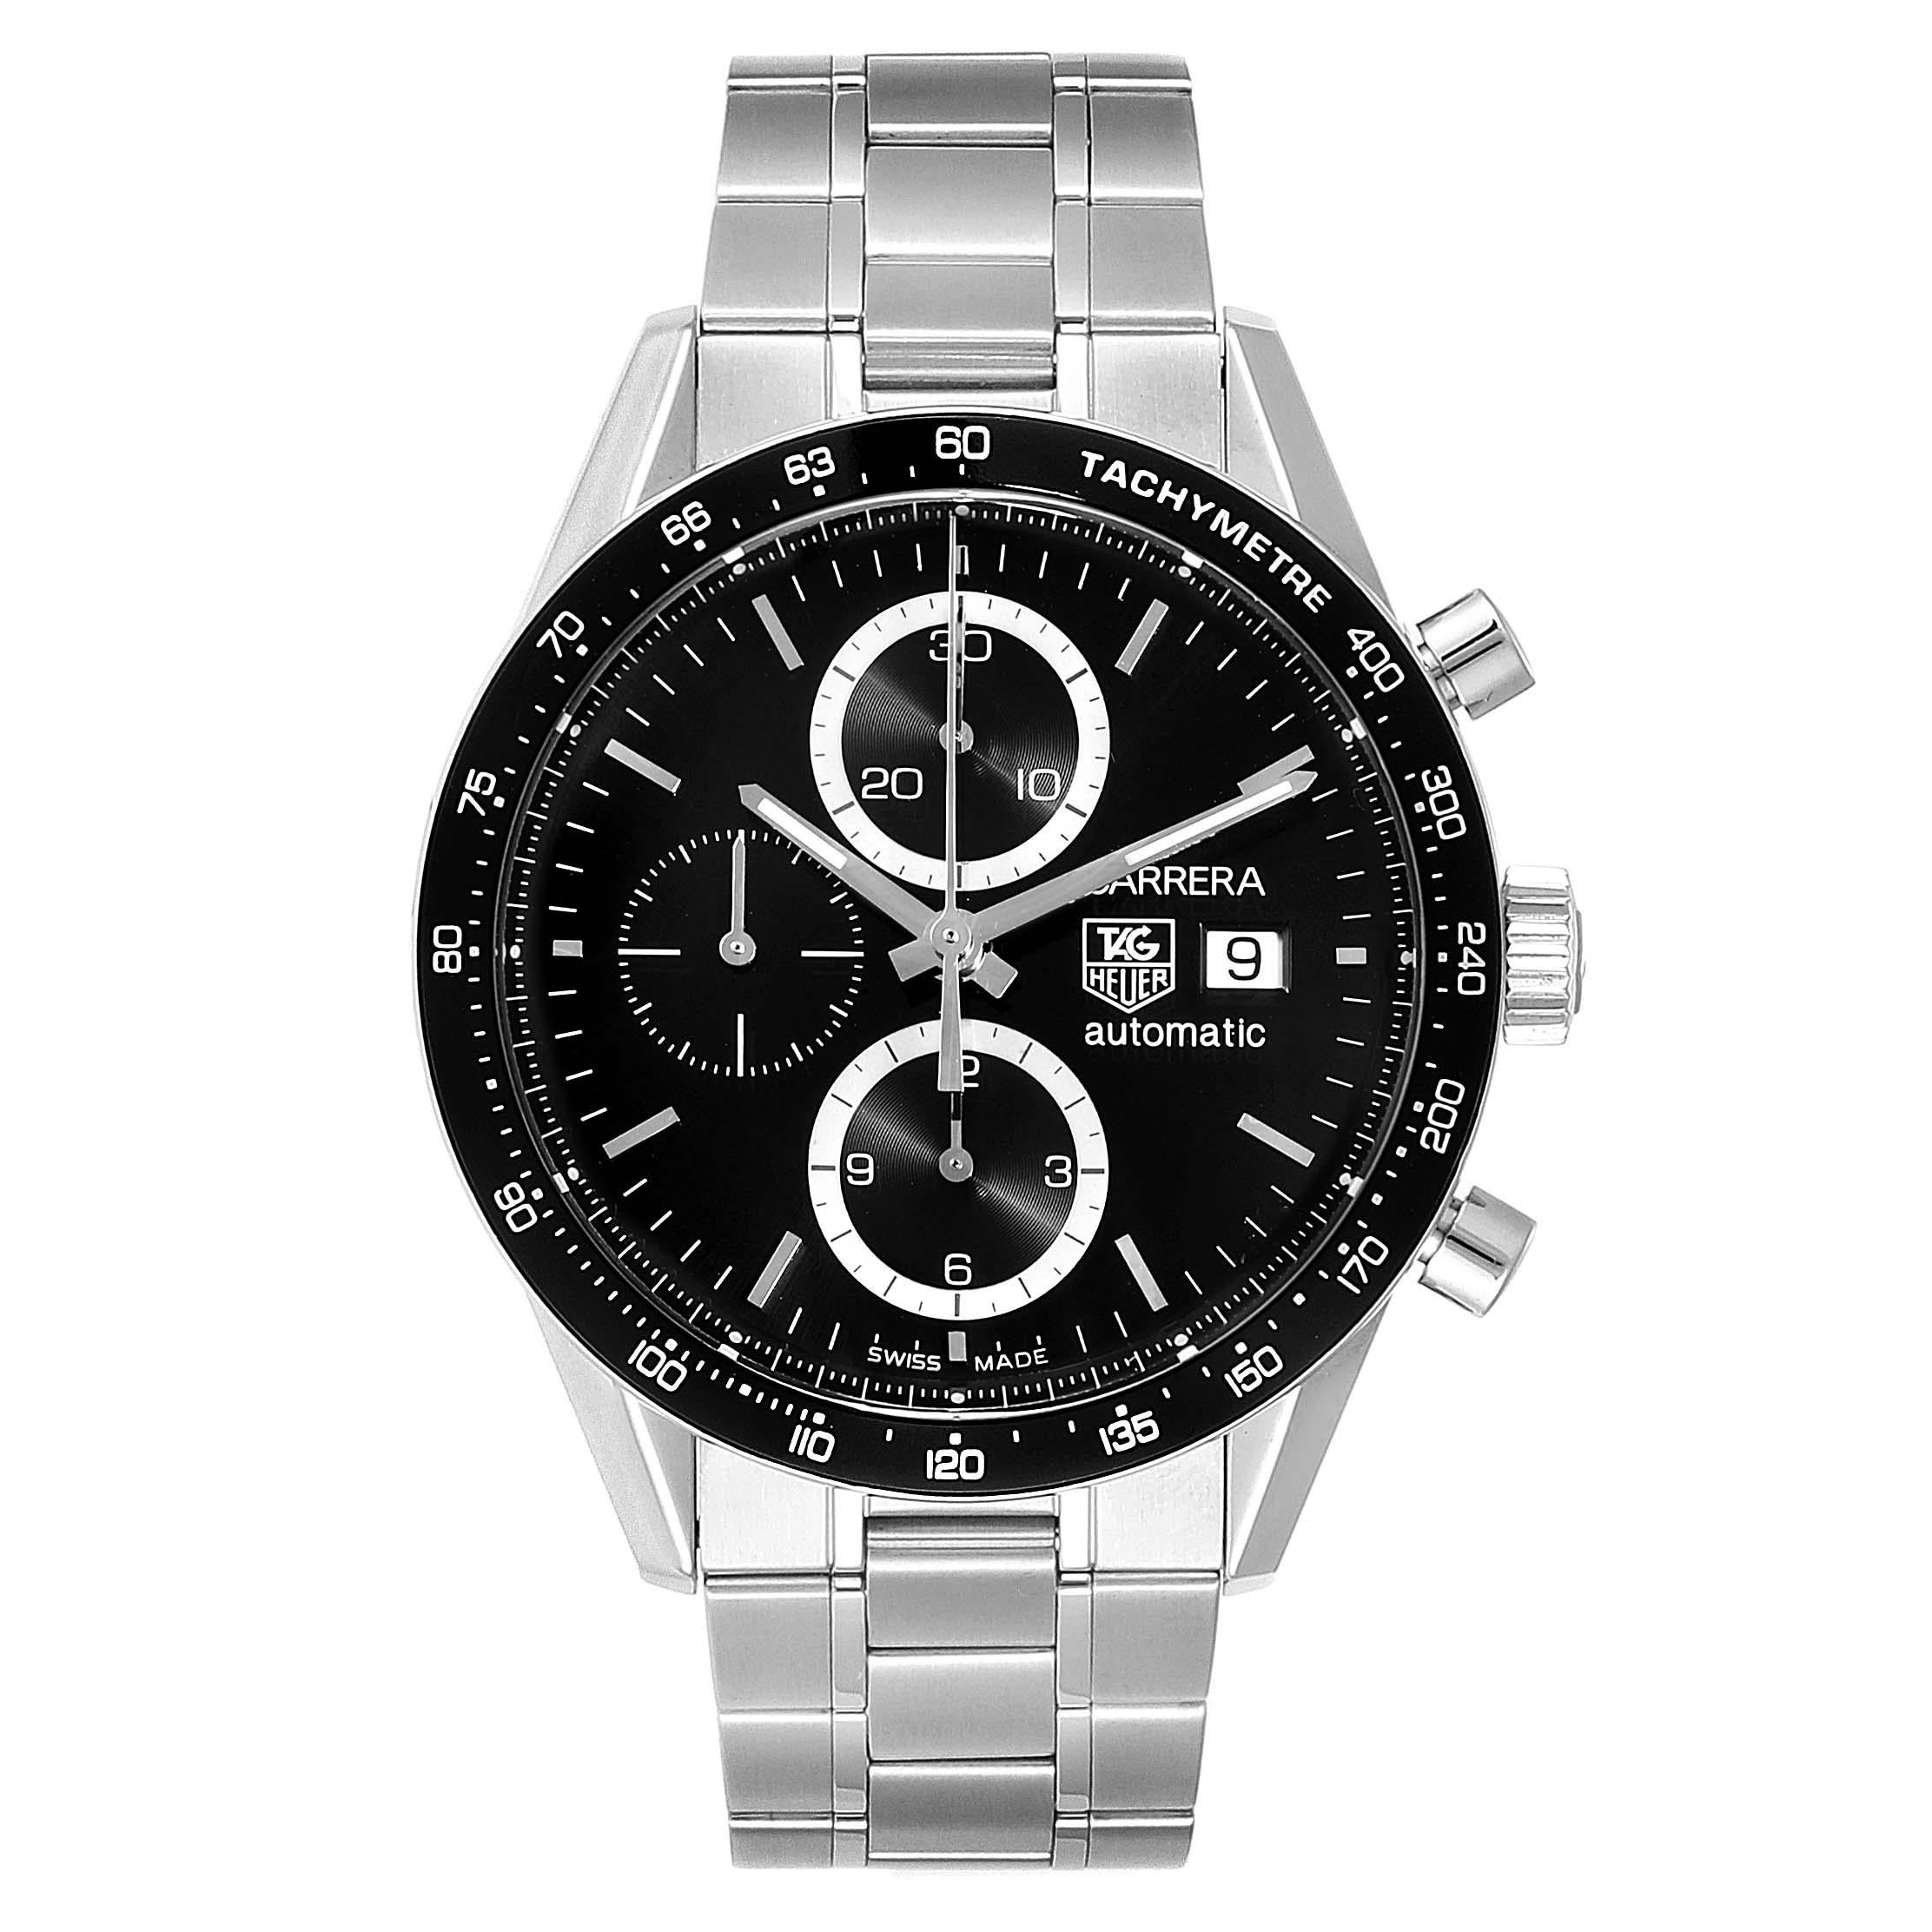 Tag Heuer Carrera Tachymeter Chronograph Mens Watch CV2010 Box Card. Automatic self-winding chronograph movement. Stainless steel case 41.0 mm in diameter. Black ion-plated bezel with tachymeter scale. Scratch resistant sapphire crystal. Black dial